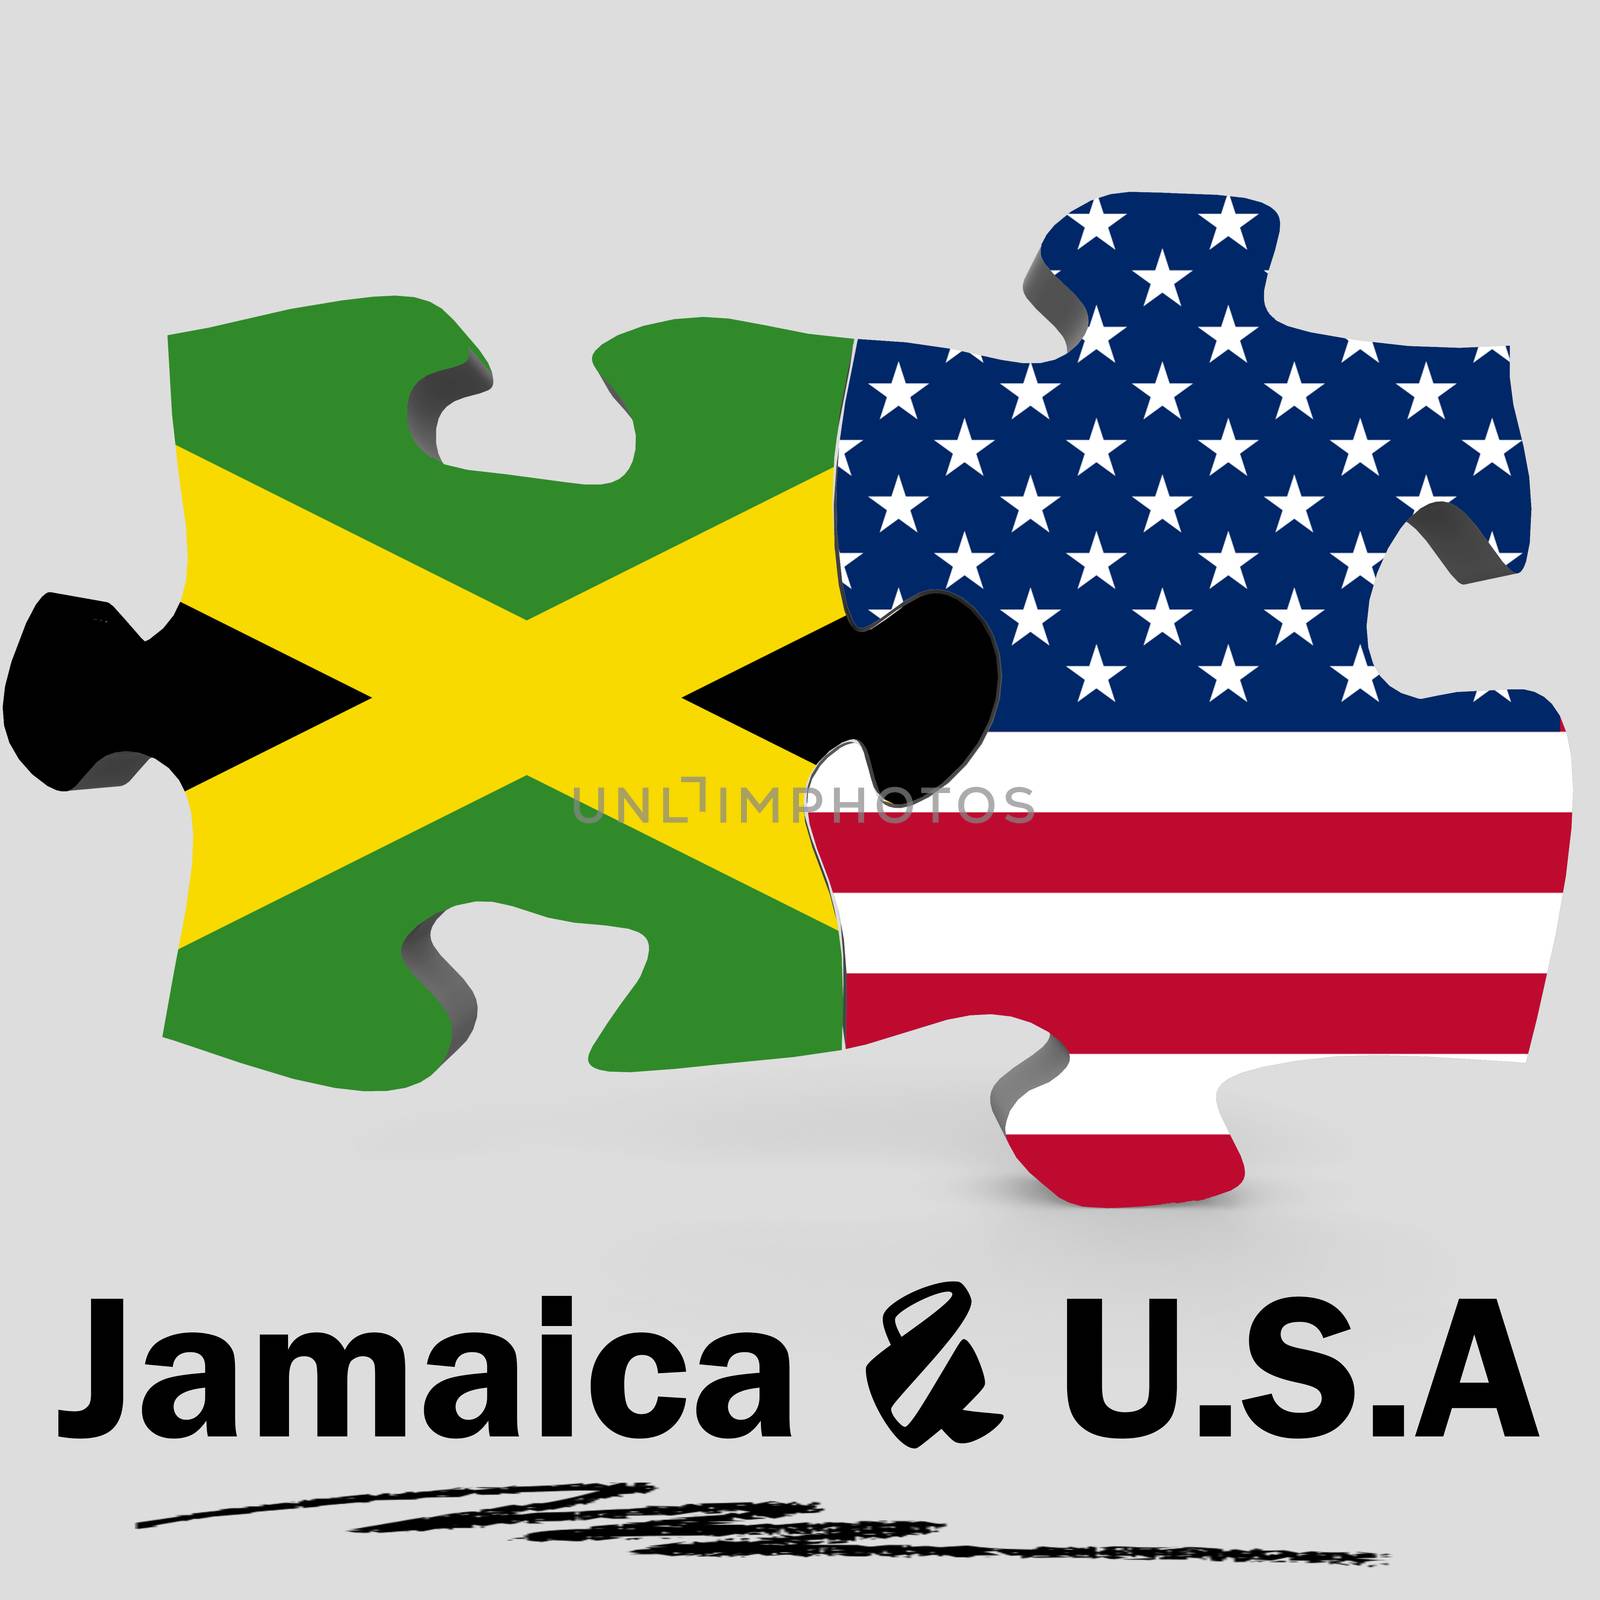 USA and Jamaica Flags in puzzle isolated on white background, 3D rendering